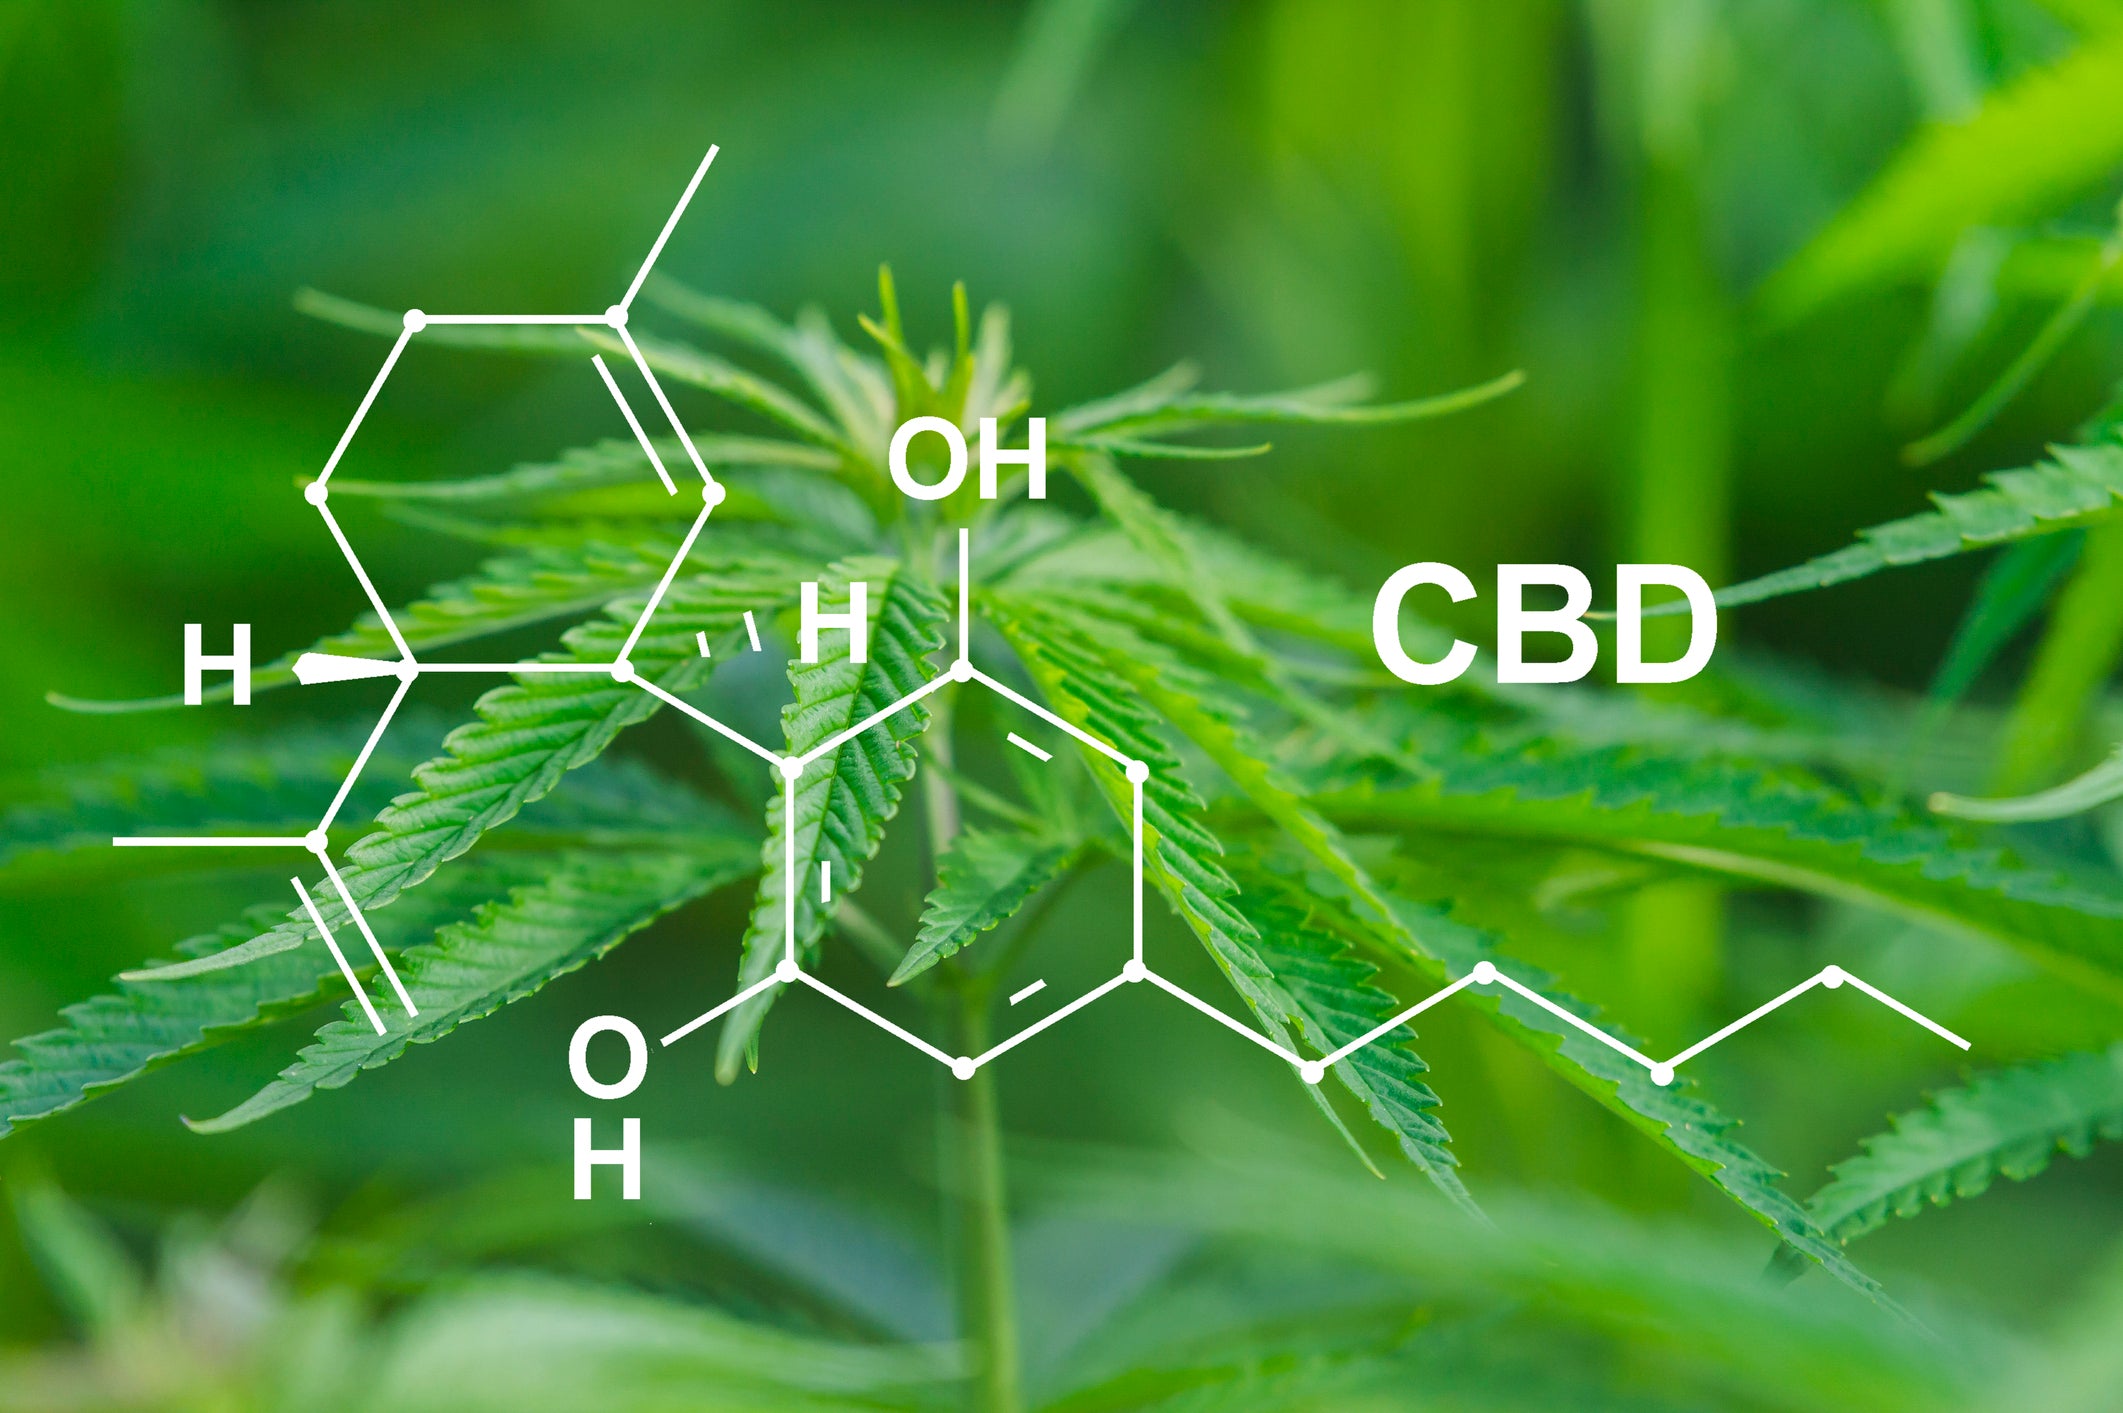 Cannabidiol (CBD) is a cannabinoid that's widely available on the market.